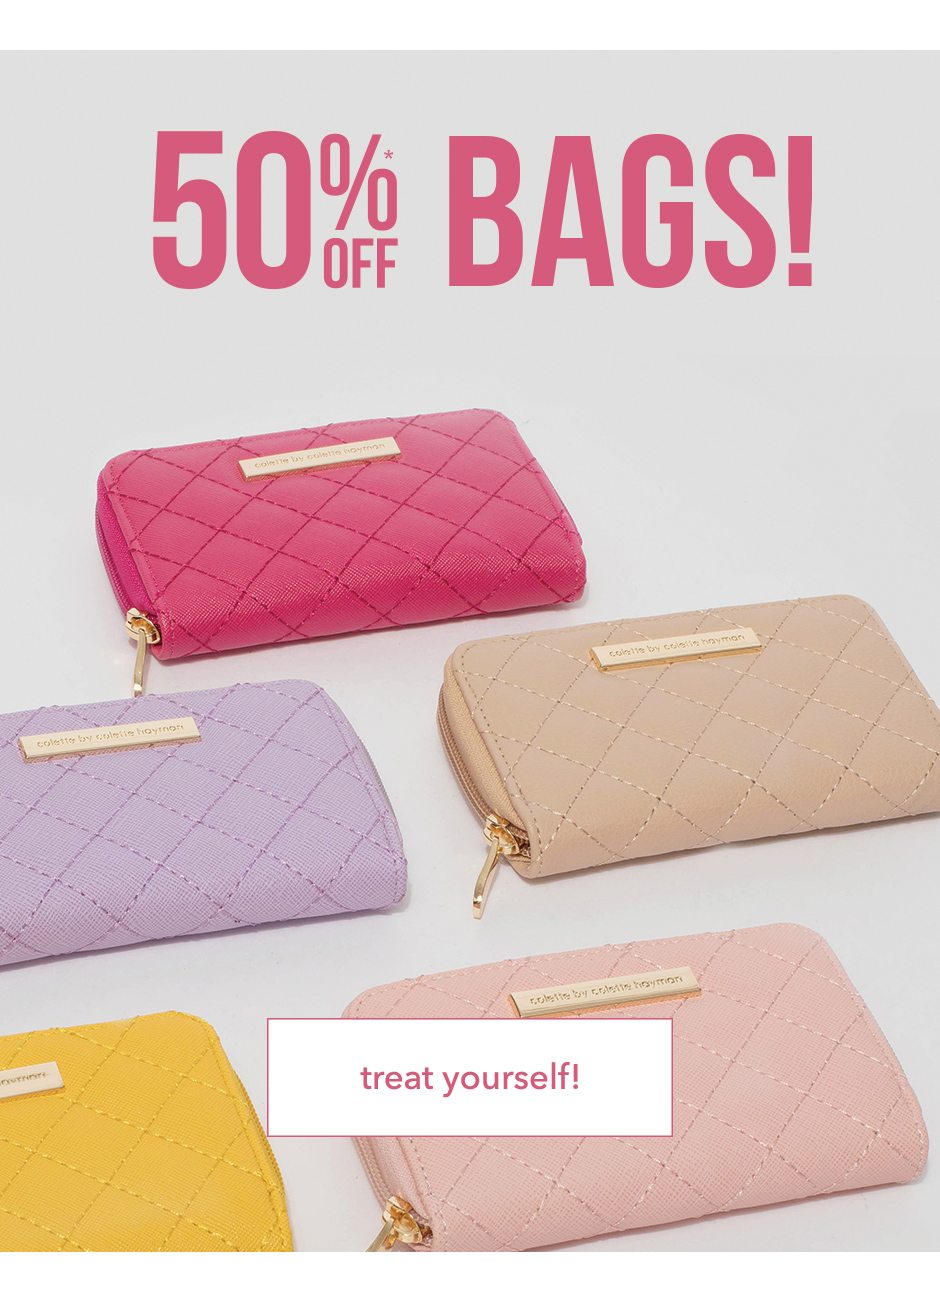 50% off Bags!